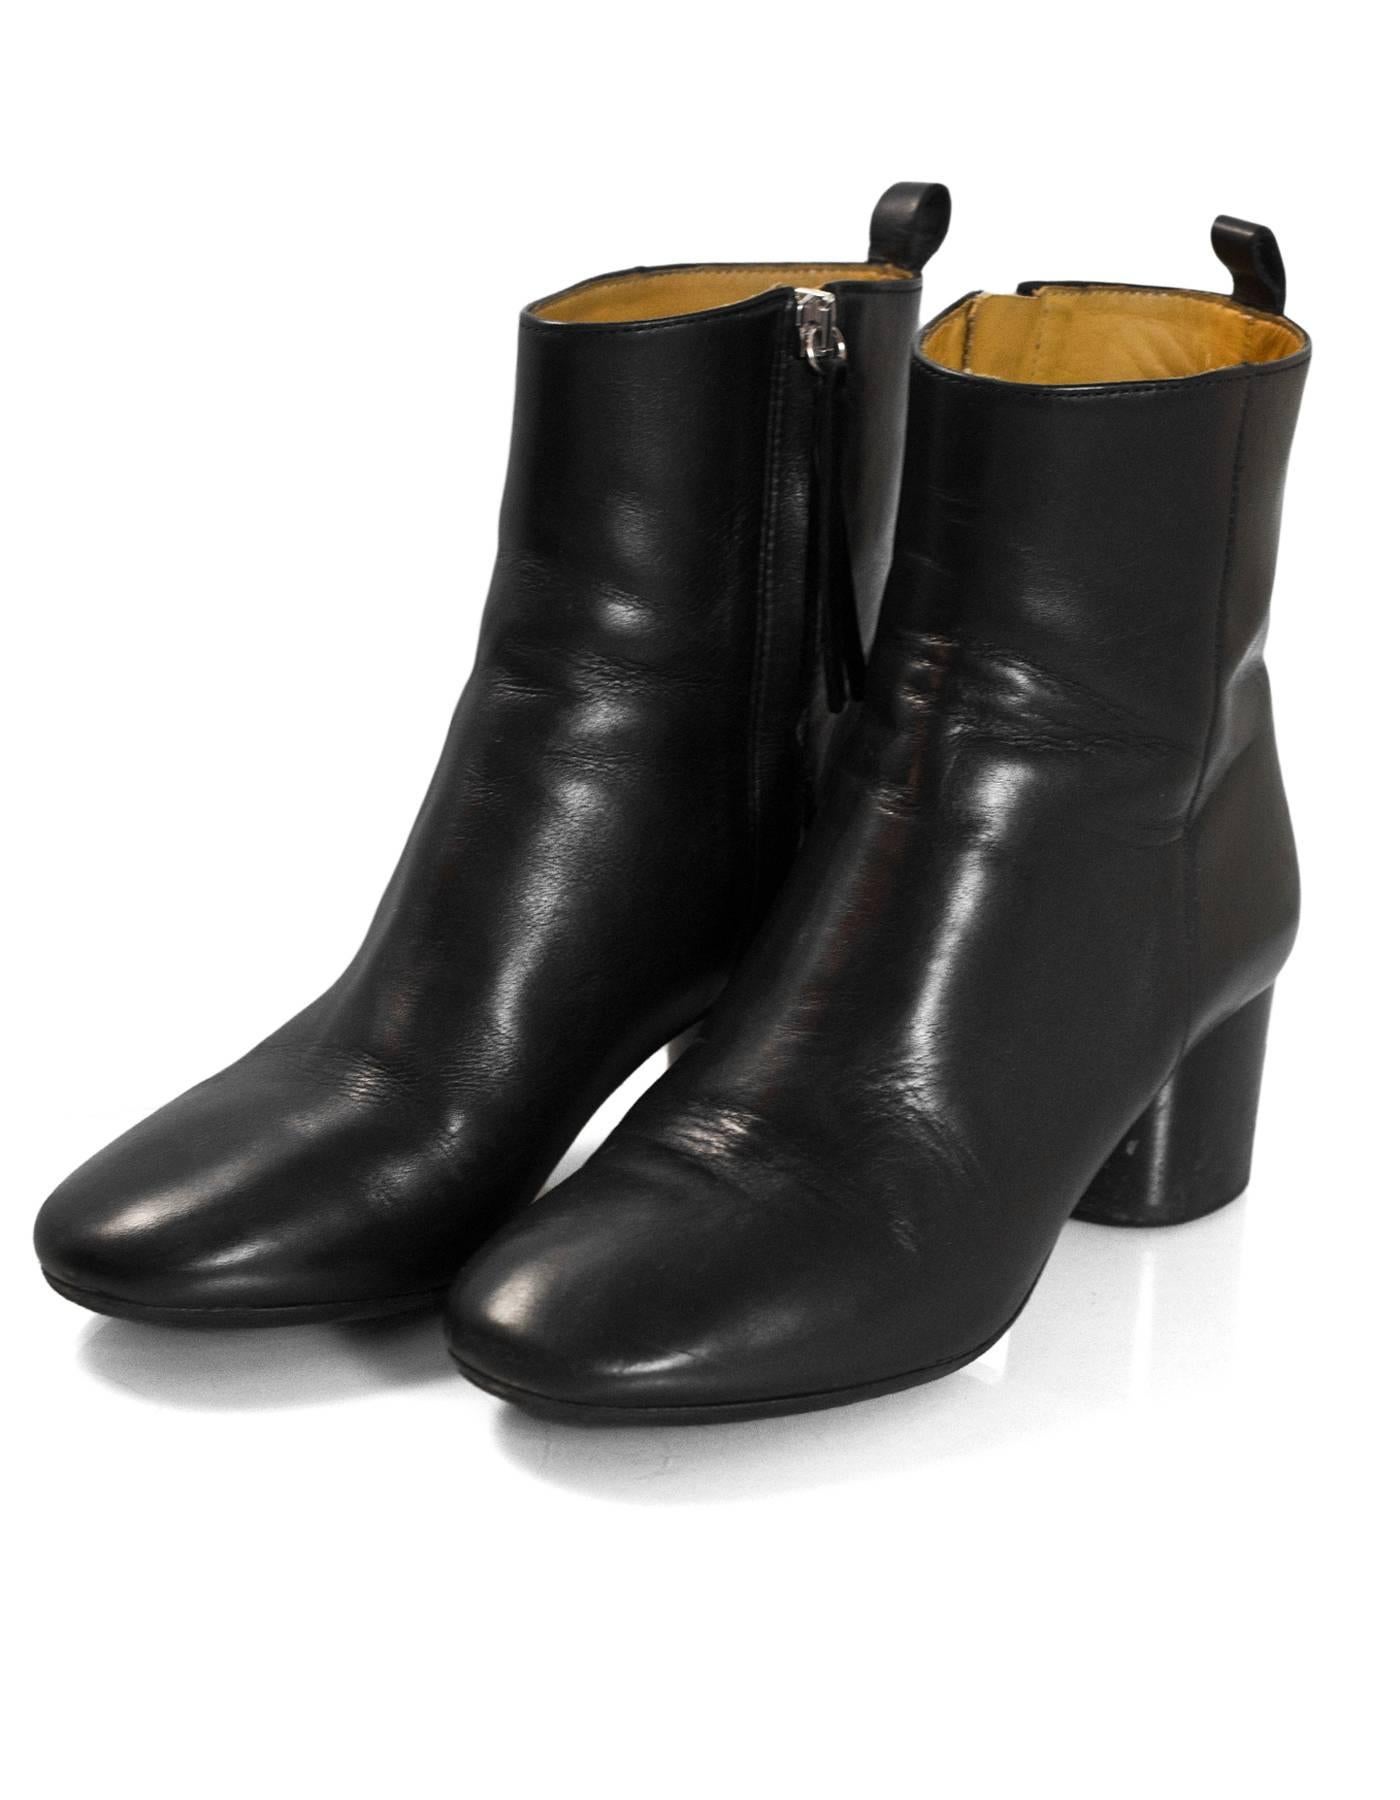 Etoile Isabel Marant Black Leather Deyissa Ankle Boots Sz 36

Made In: Portugal
Color: Black
Materials: Leather
Closure/Opening: Side zip closure
Sole Stamp: Isabel Marant Etoile Made in Portugal 36
Retail Price: $580+ tax
Overall Condition: